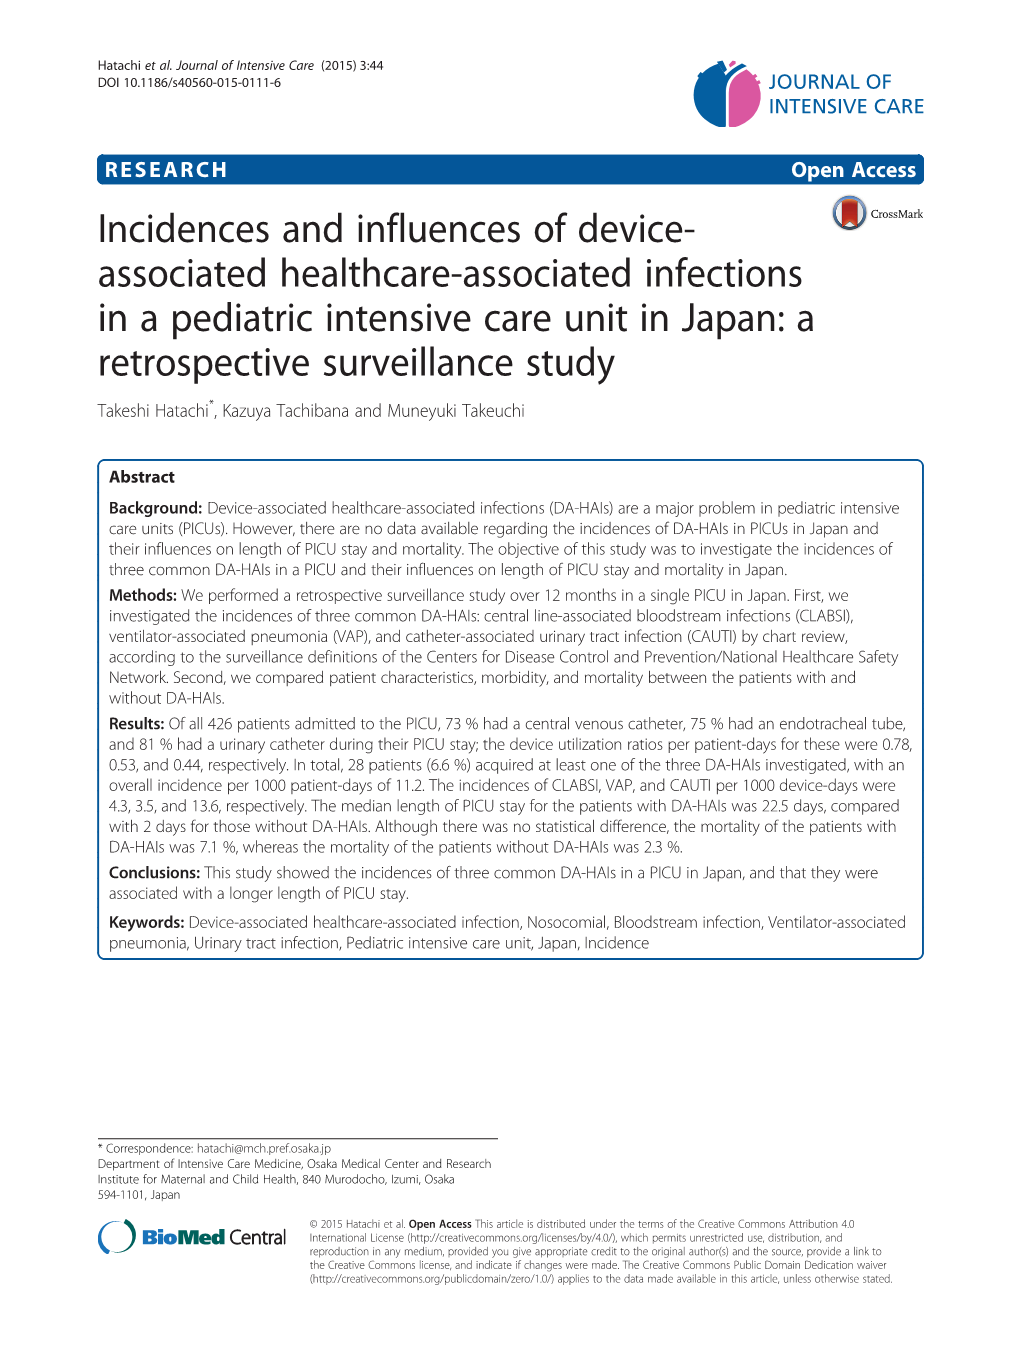 Incidences and Influences of Device-Associated